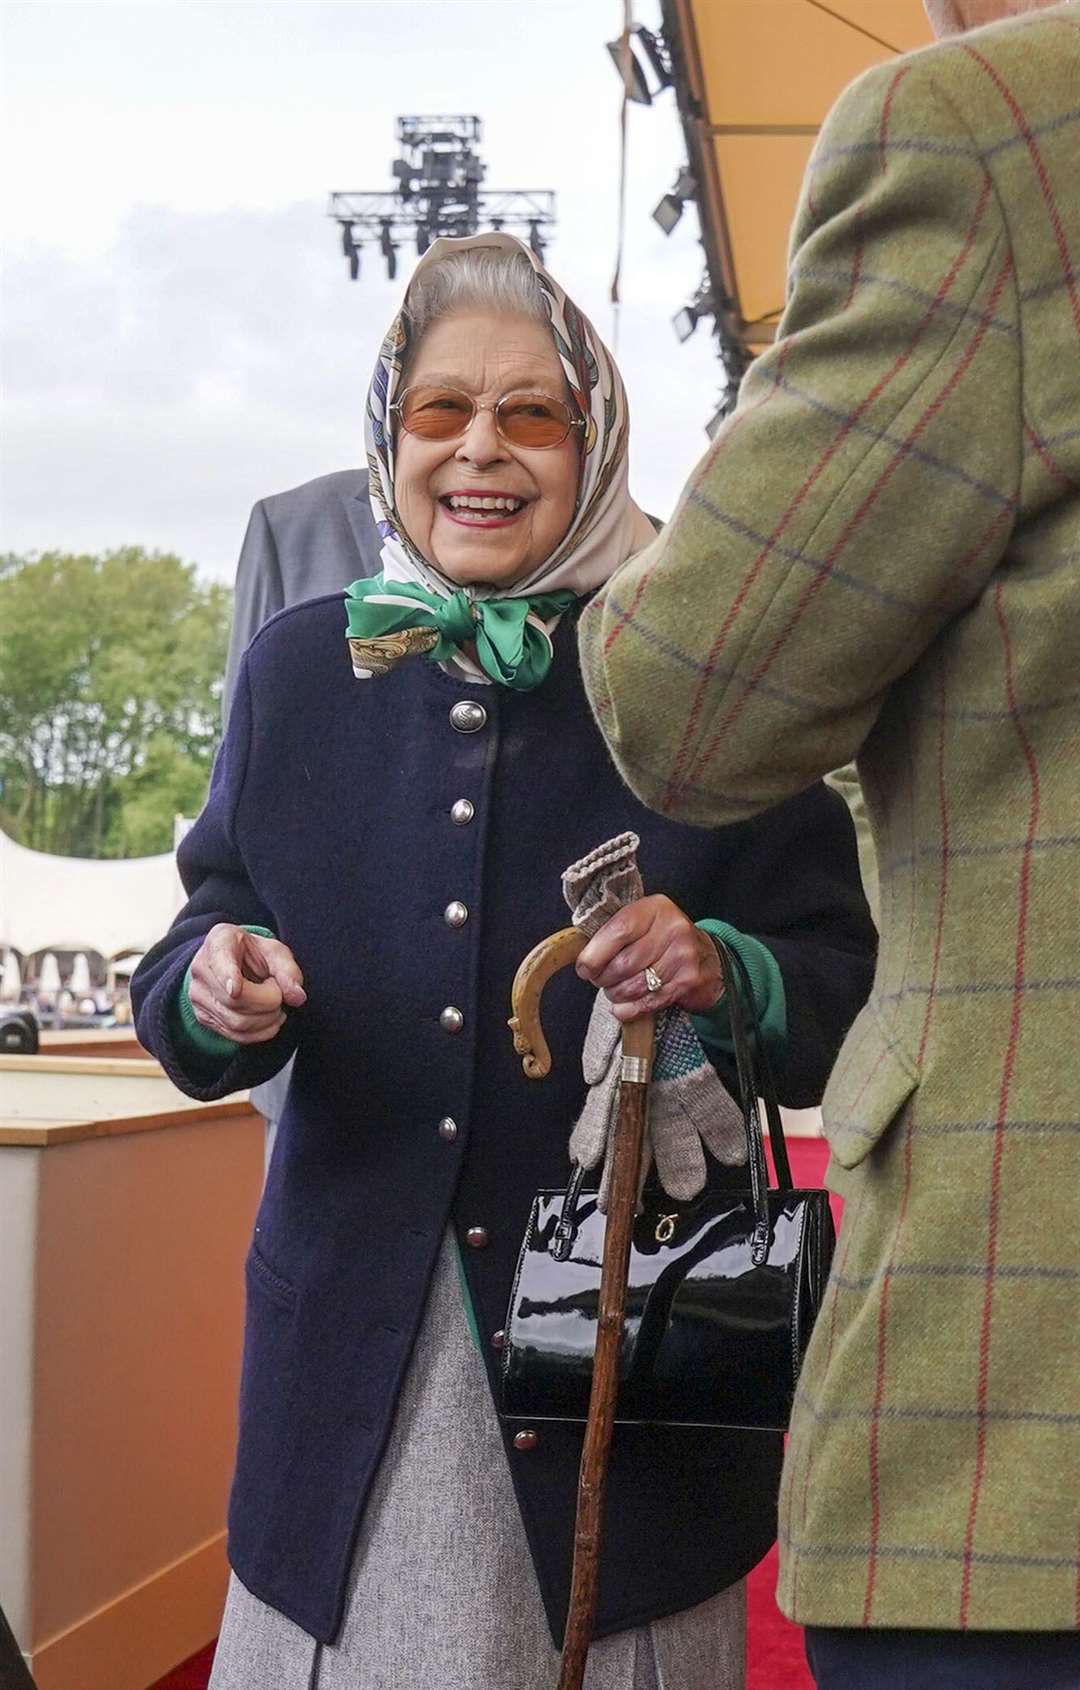 The Queen at the Royal Windsor Horse Show in May (Steve Parsons/PA)